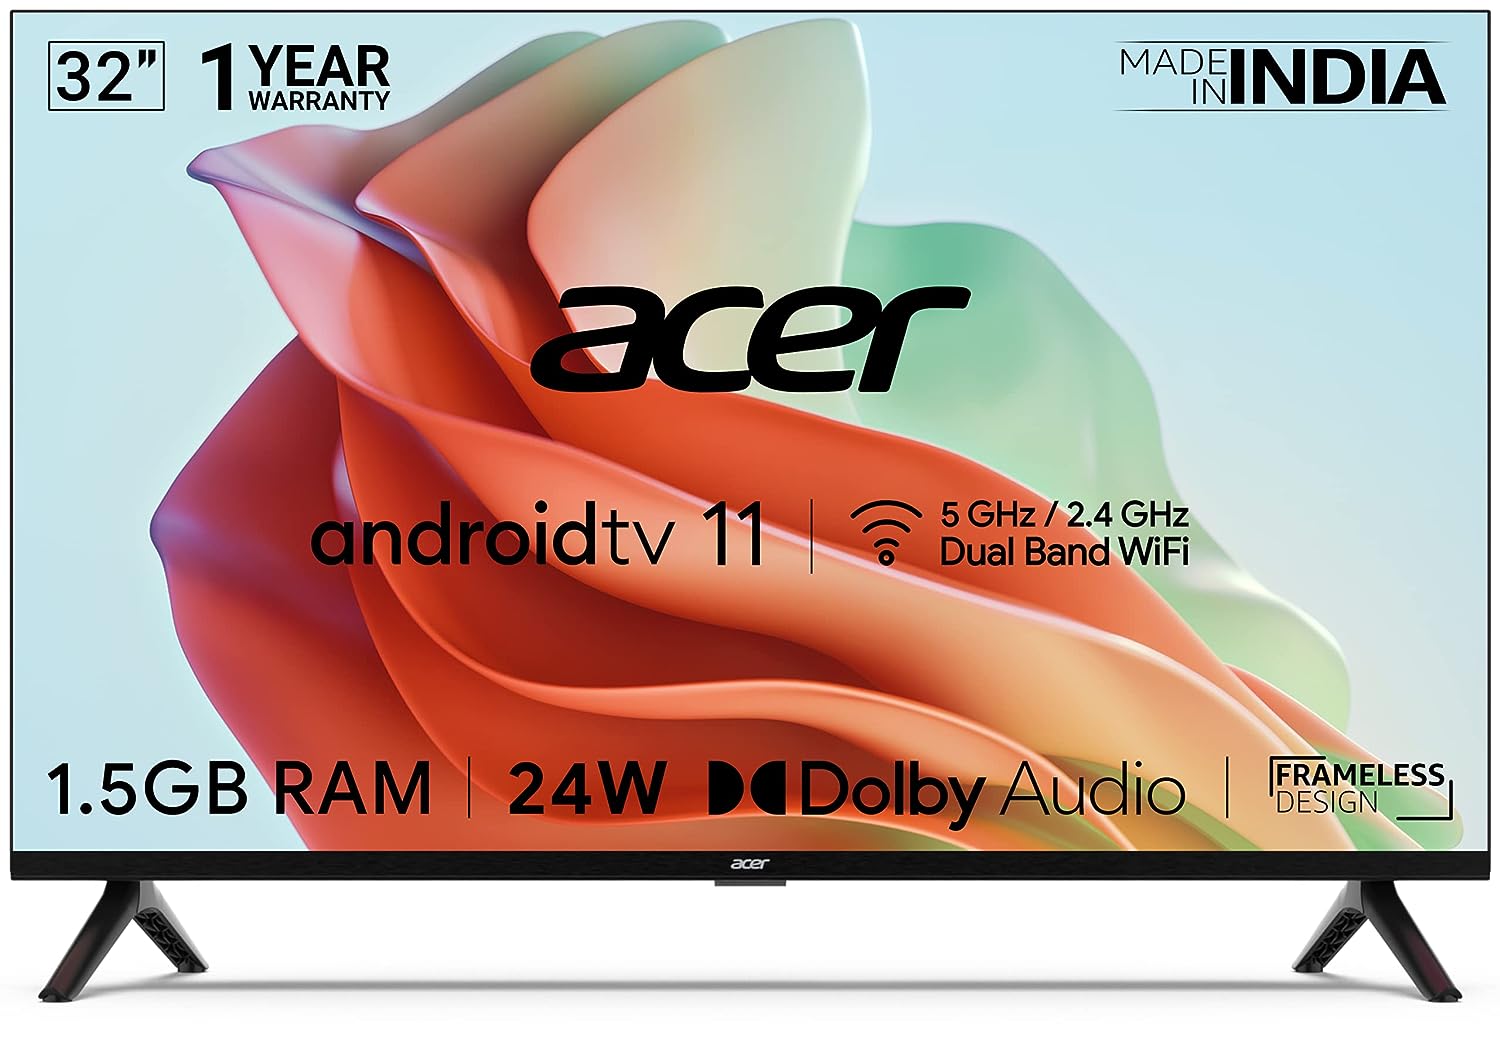 Acer (32 inches) I Series Android Smart TV